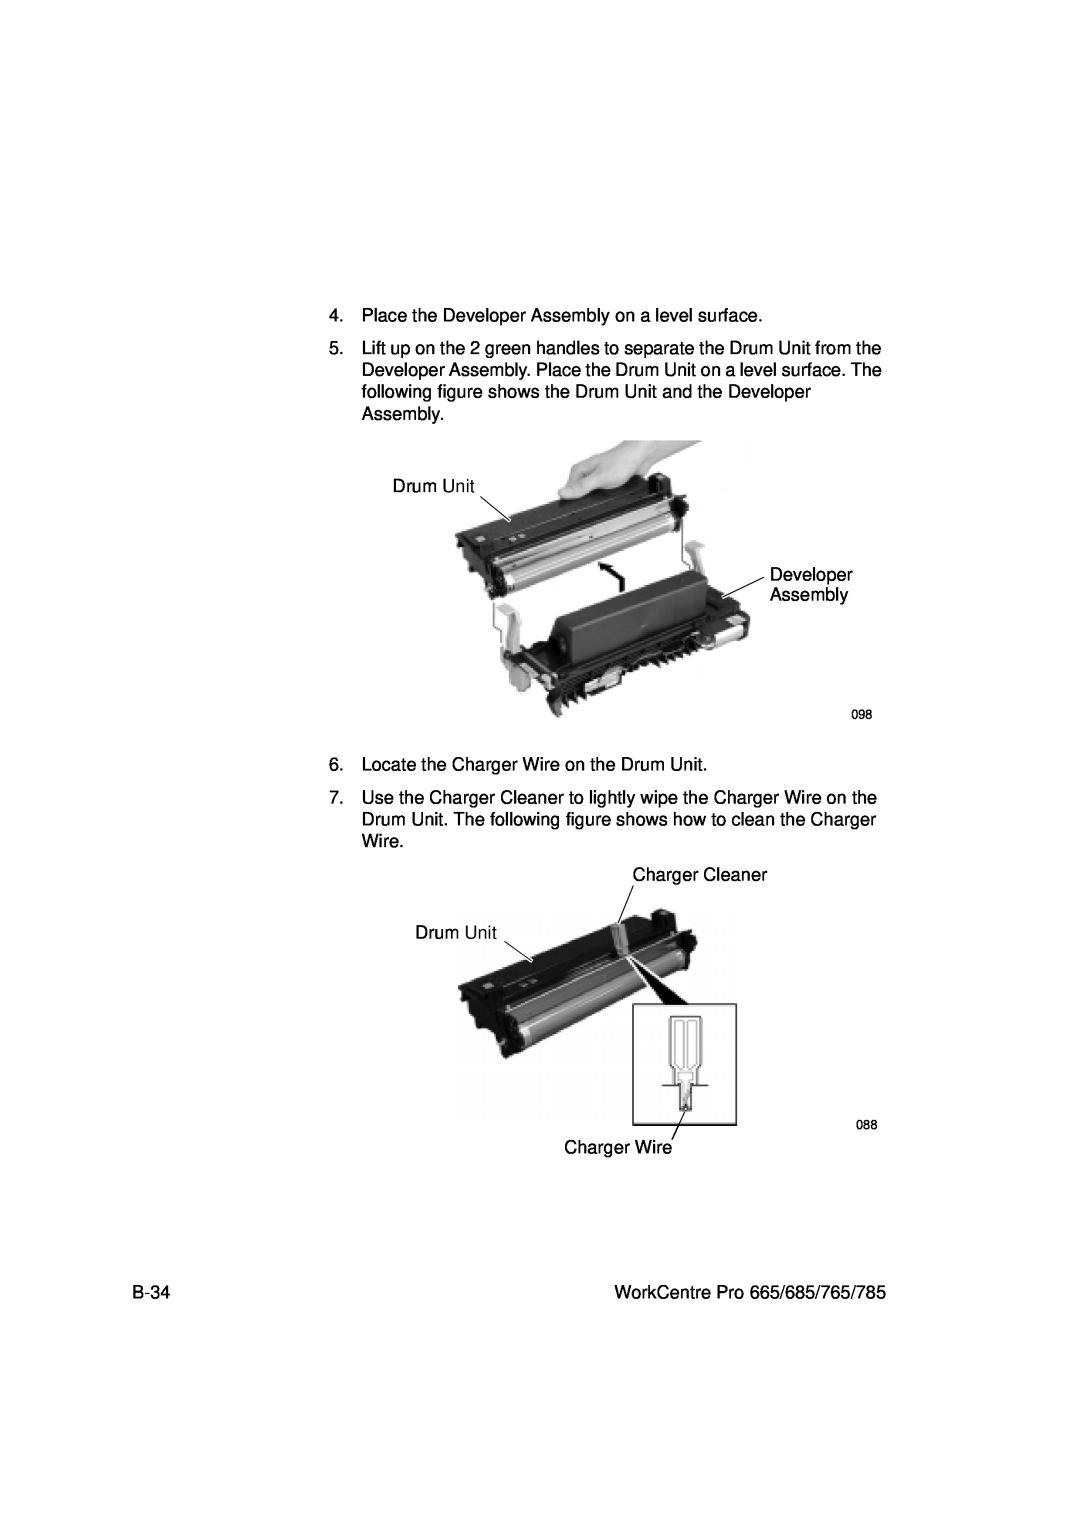 Xerox 765, 665, 685, 785 manual Place the Developer Assembly on a level surface 